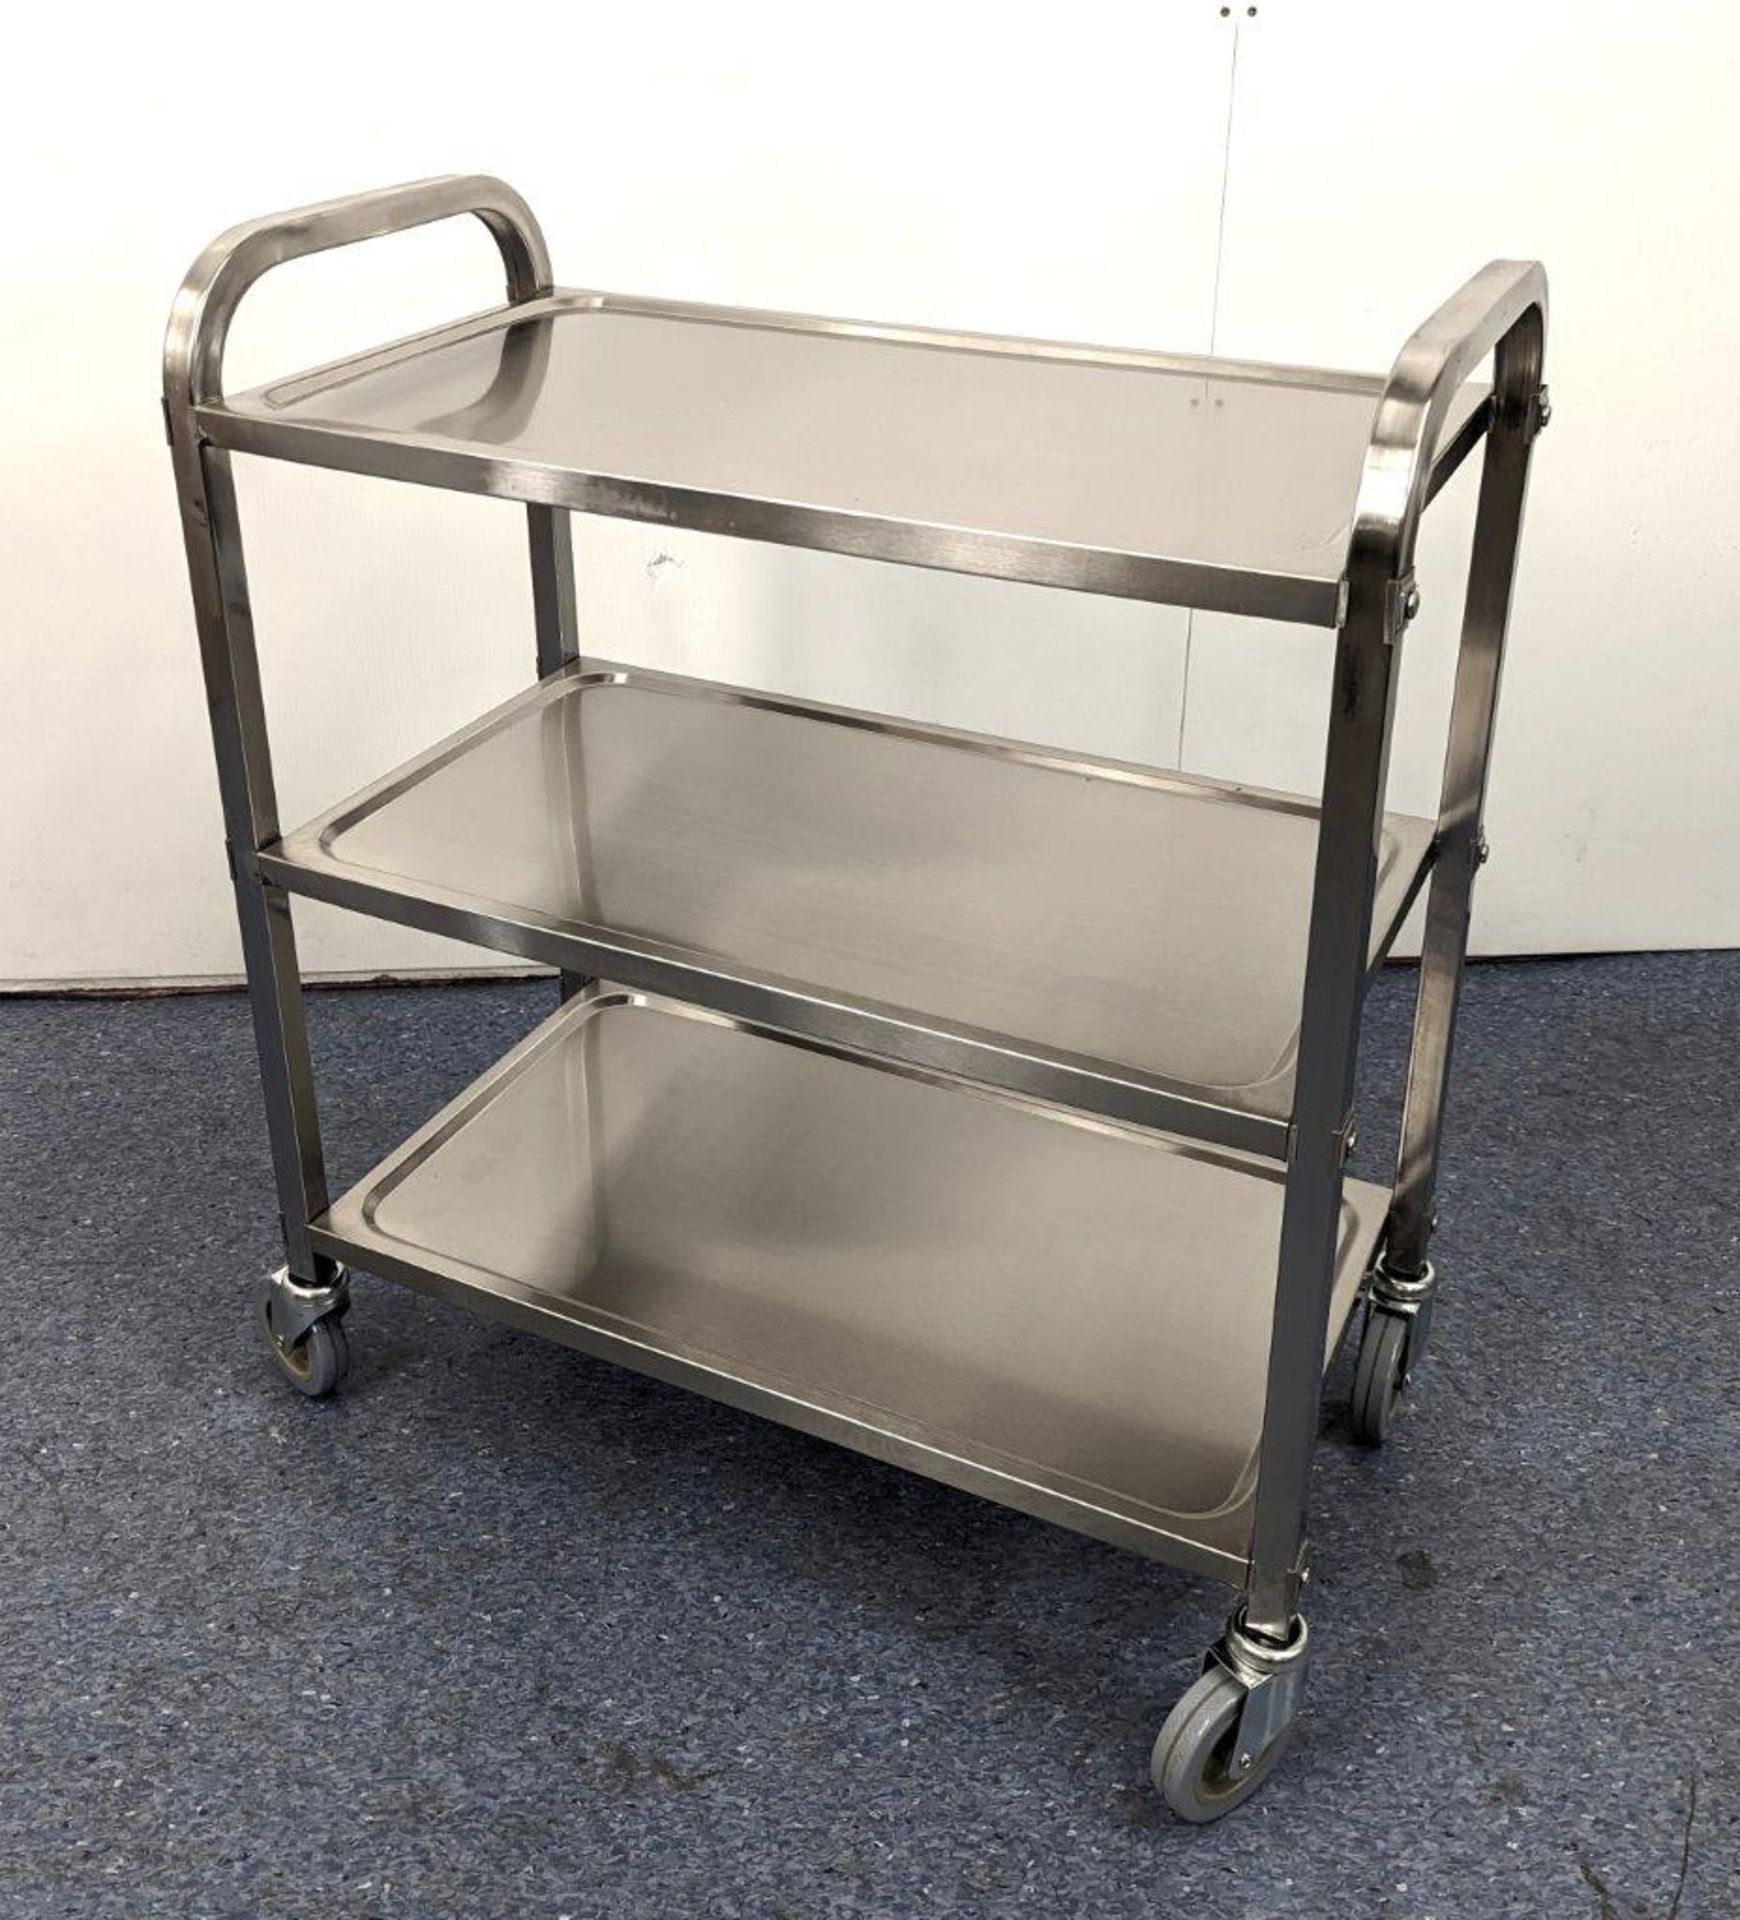 STAINLESS STEEL BUSSING CART WITH 27.25" X 15.75" TRAY SIZE, OMCAN 24418